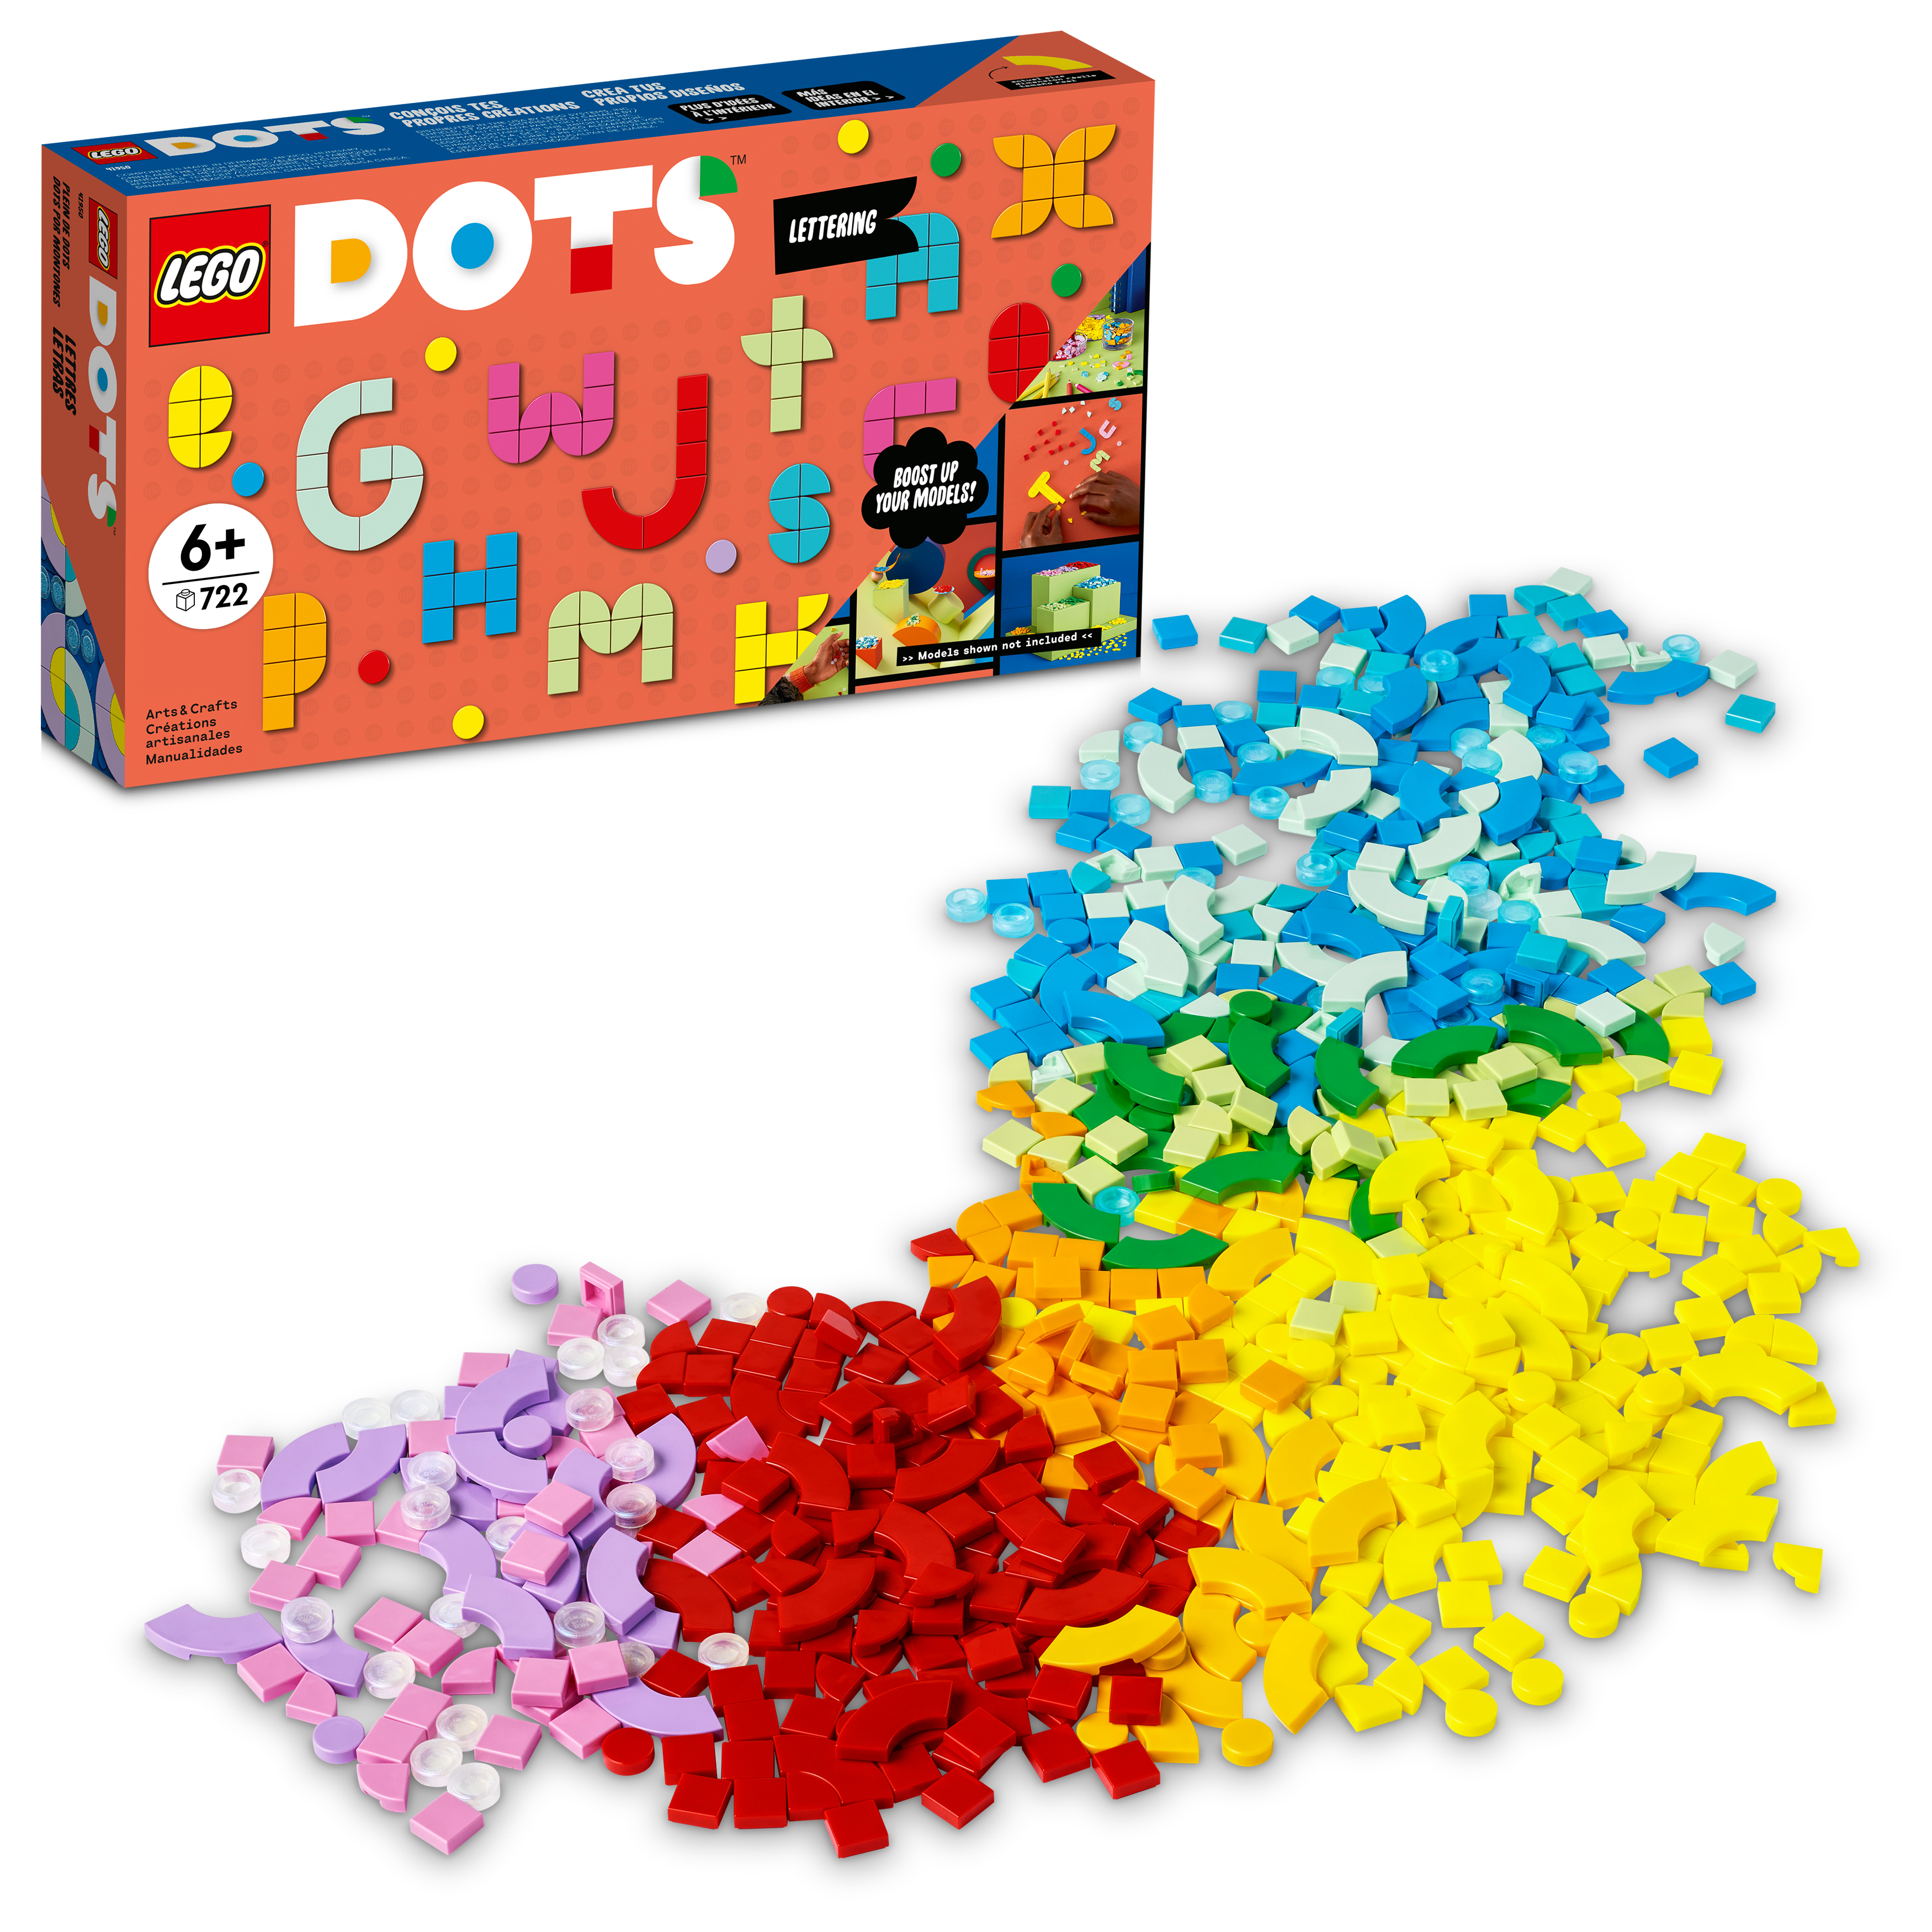 LEGO® DOTS Lots of DOTS Lettering 41950 DIY Craft Decoration Kit (722 Pieces)